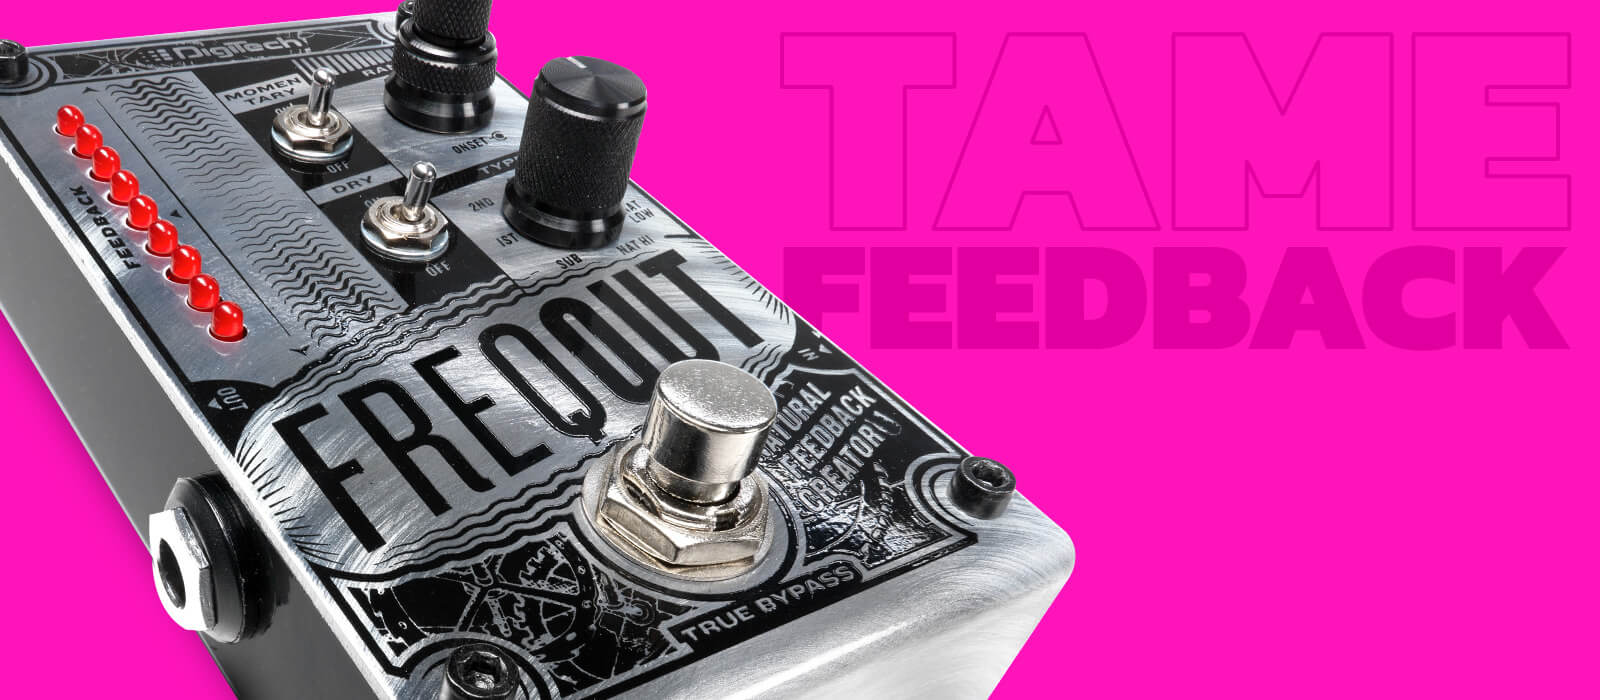 DigiTech FreqOut natural feedback creator in silver with black graphics, pink background and graphics that says 